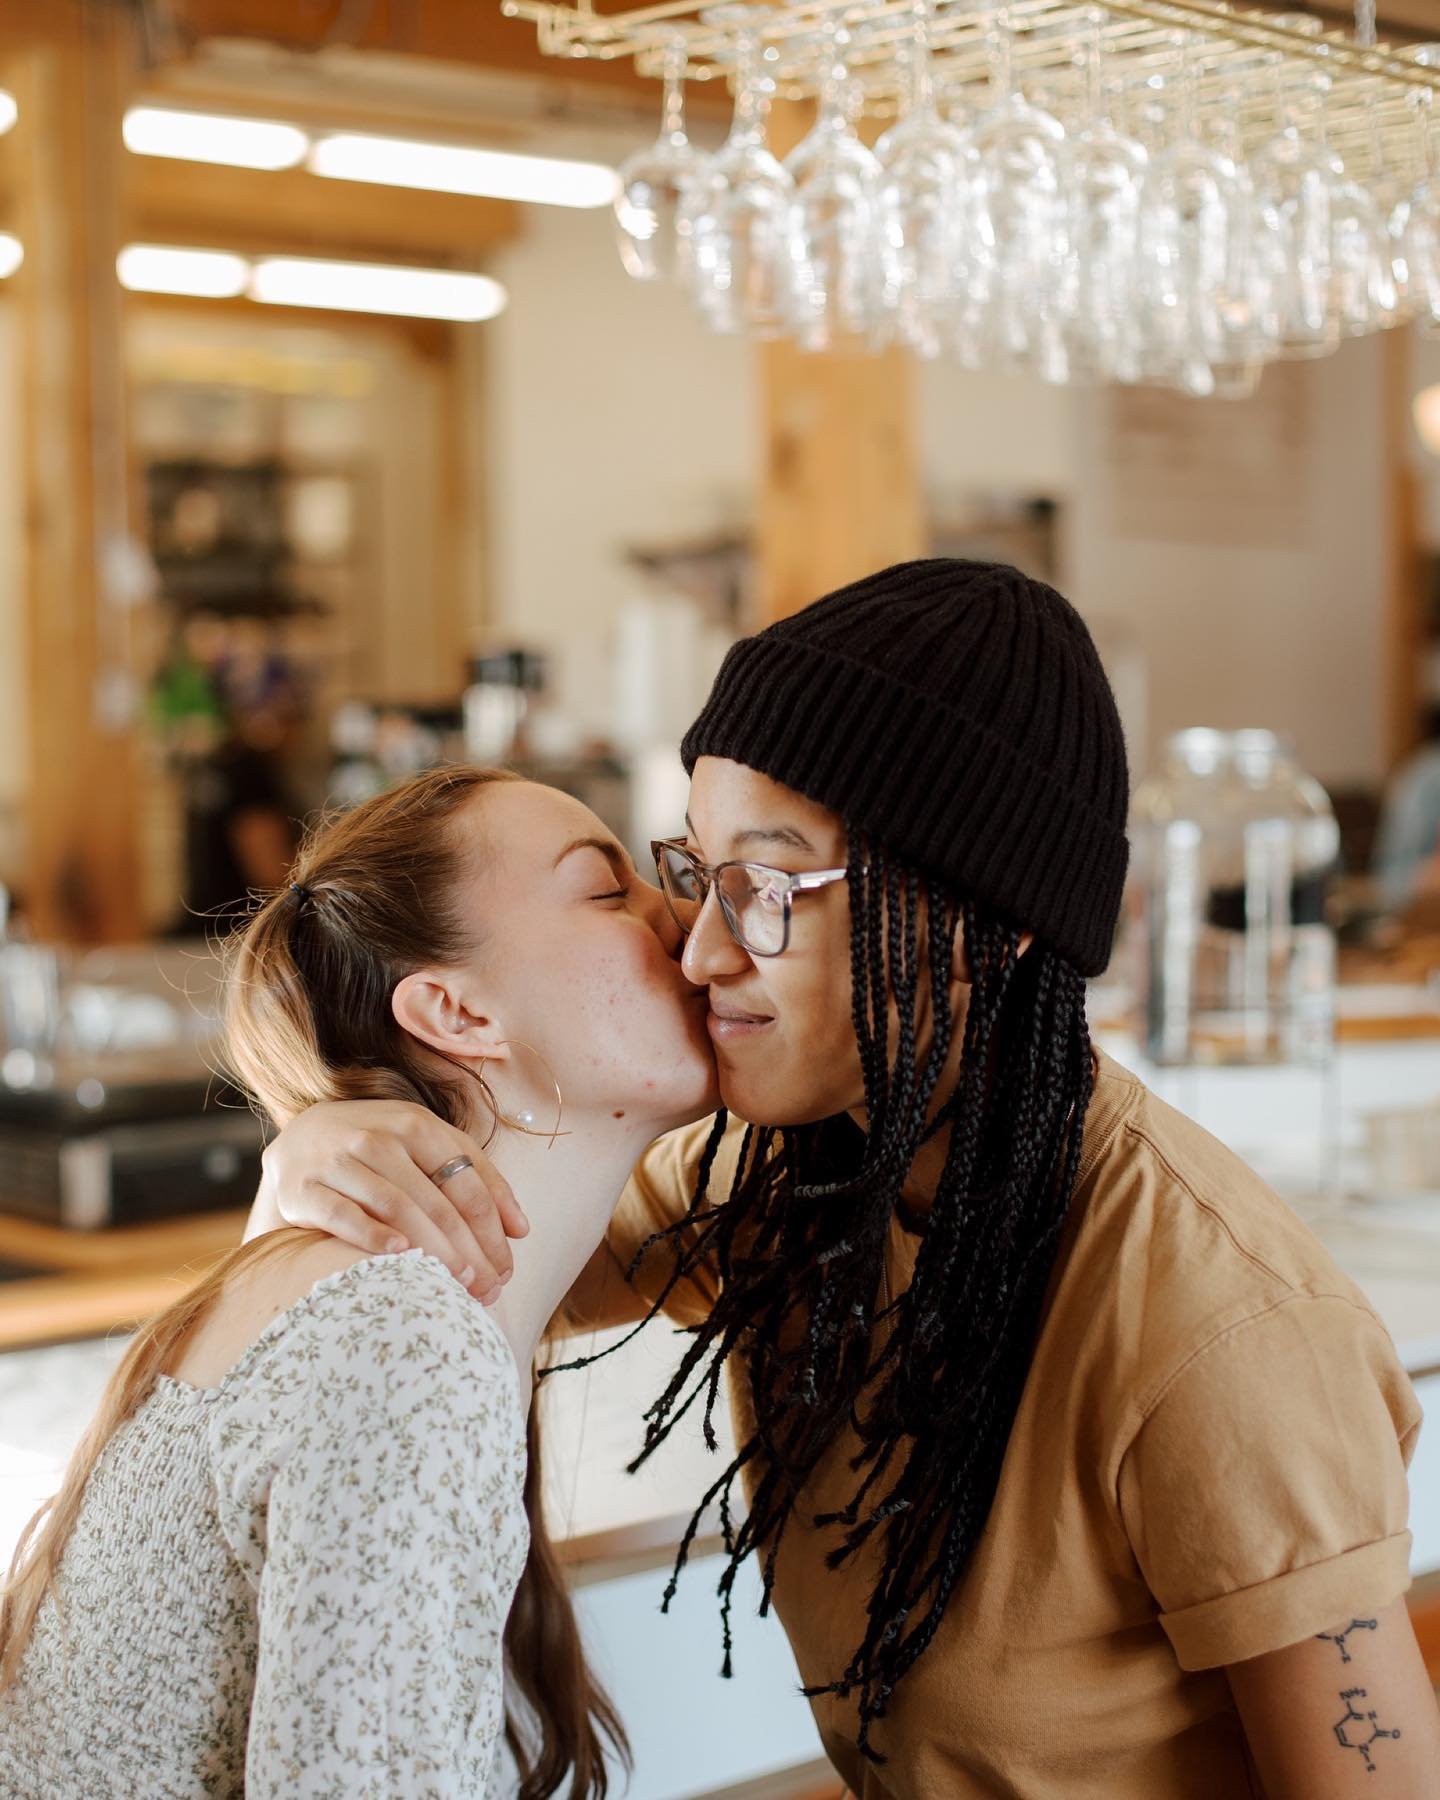 An engagement session photographed in the places A + D go every day, the places where they&rsquo;re most comfortable and mean the most to their relationship. A manages at this caf&eacute; so D keeps her company most of the time working remotely, and 